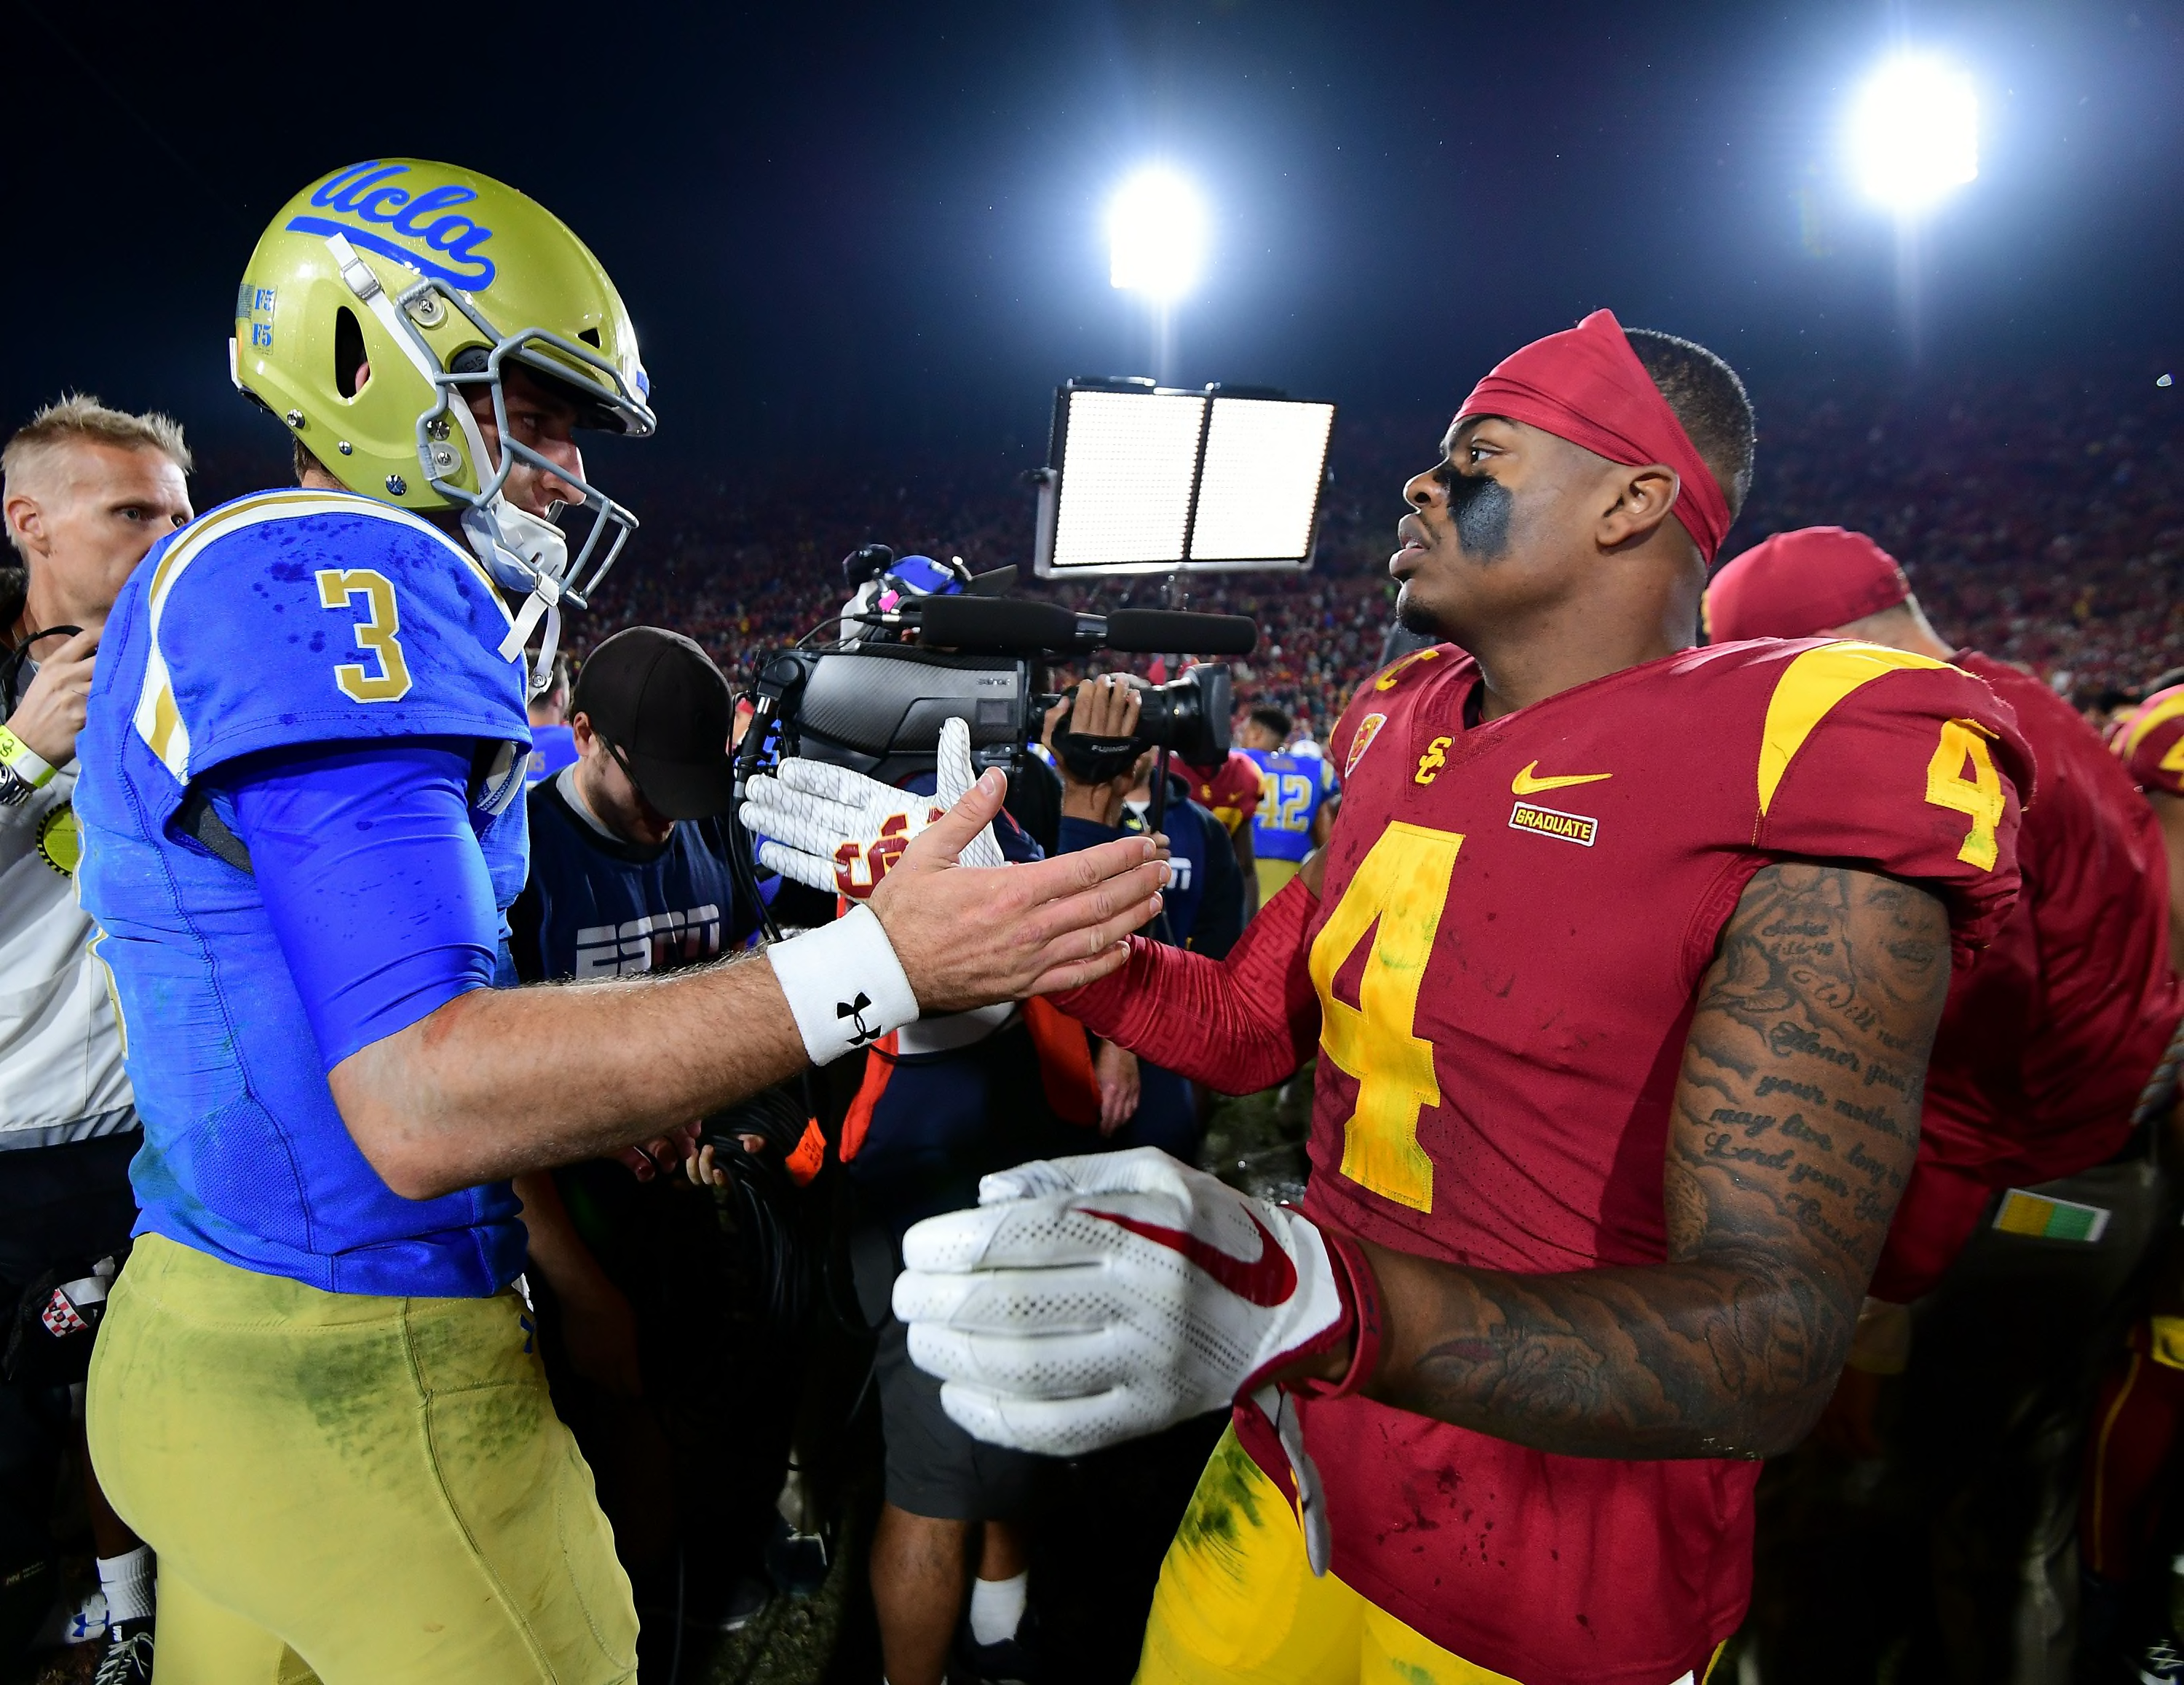 UCLA vs USC Three things we learned from the real battle for LA